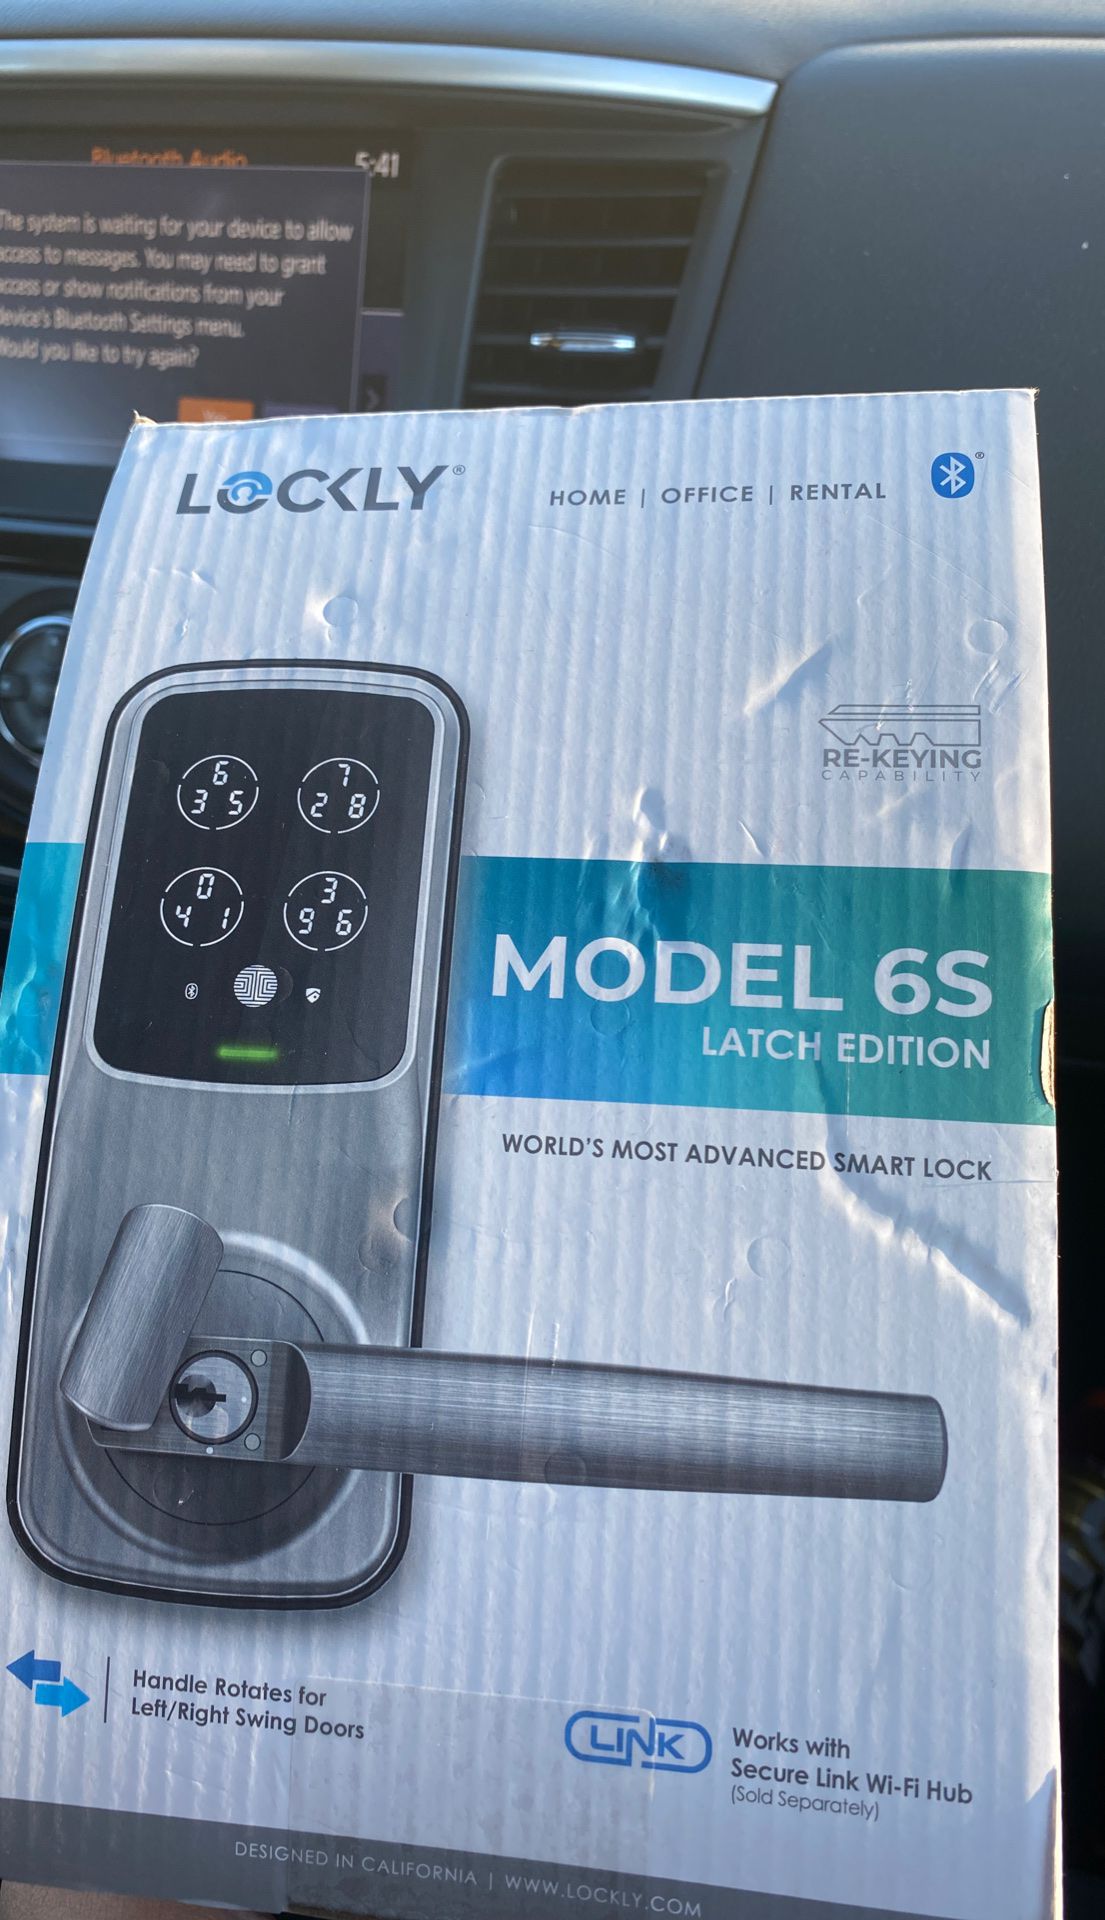 LOCKLY ; HOME | OFFICE | RENTAL / MODEL 6S LATCH EDITION ; World’s Most Advanced Smart Lock